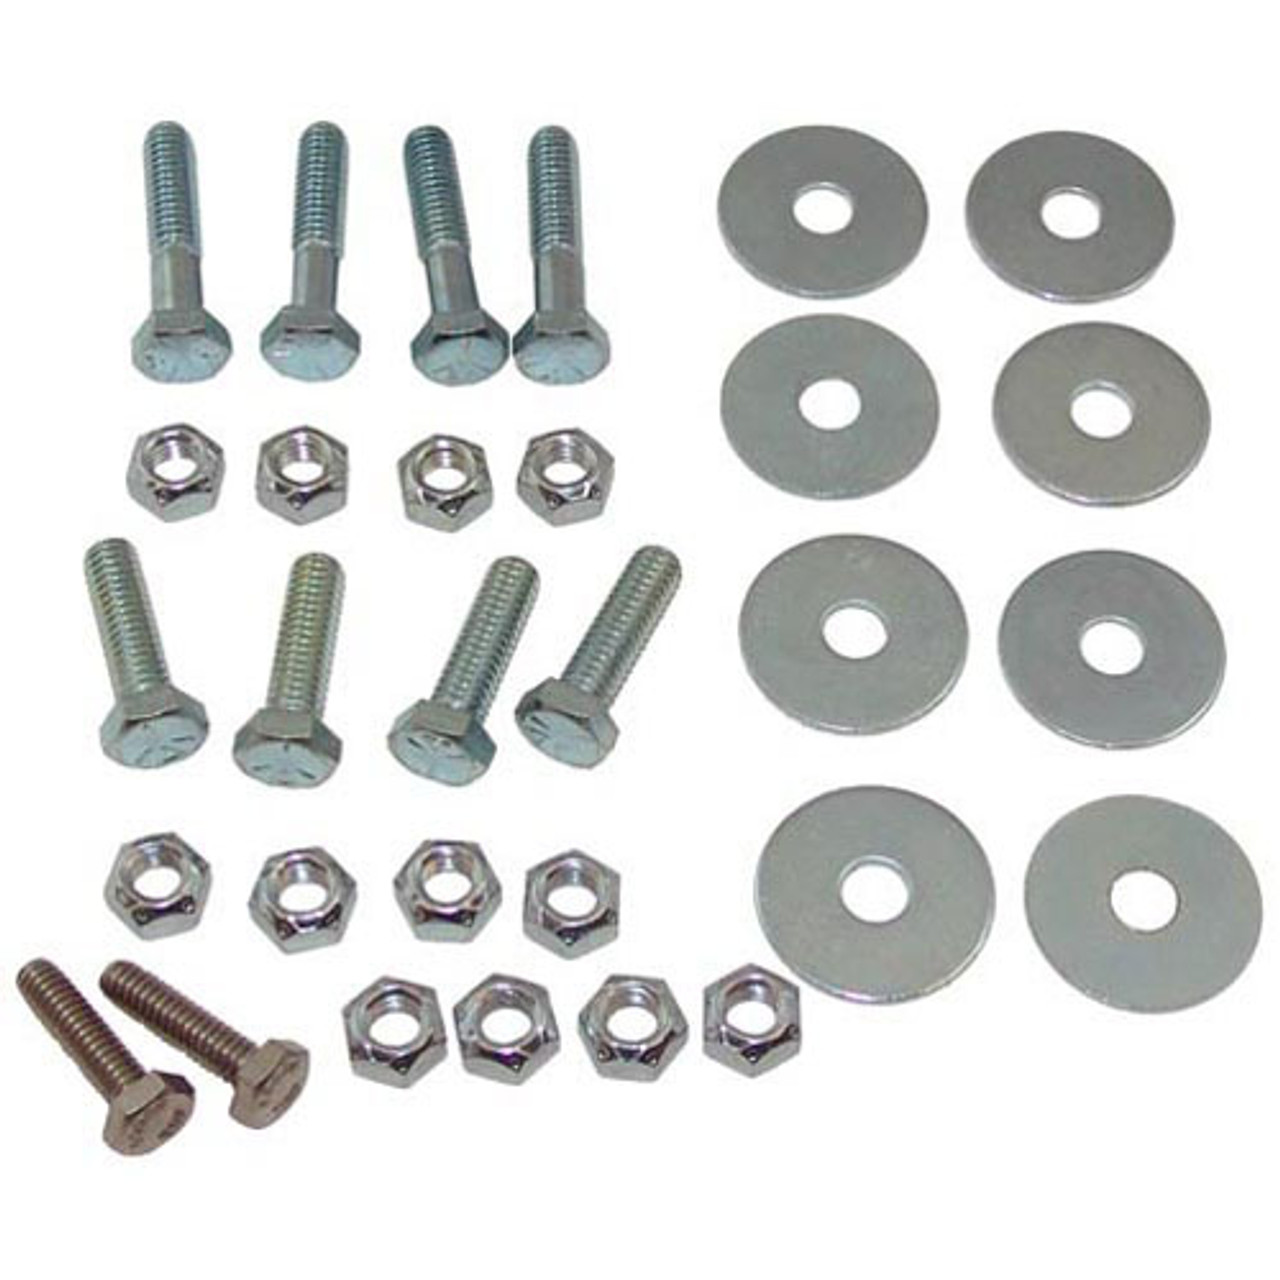 Hardware Kit - Replacement Part For Hobart 347119-1